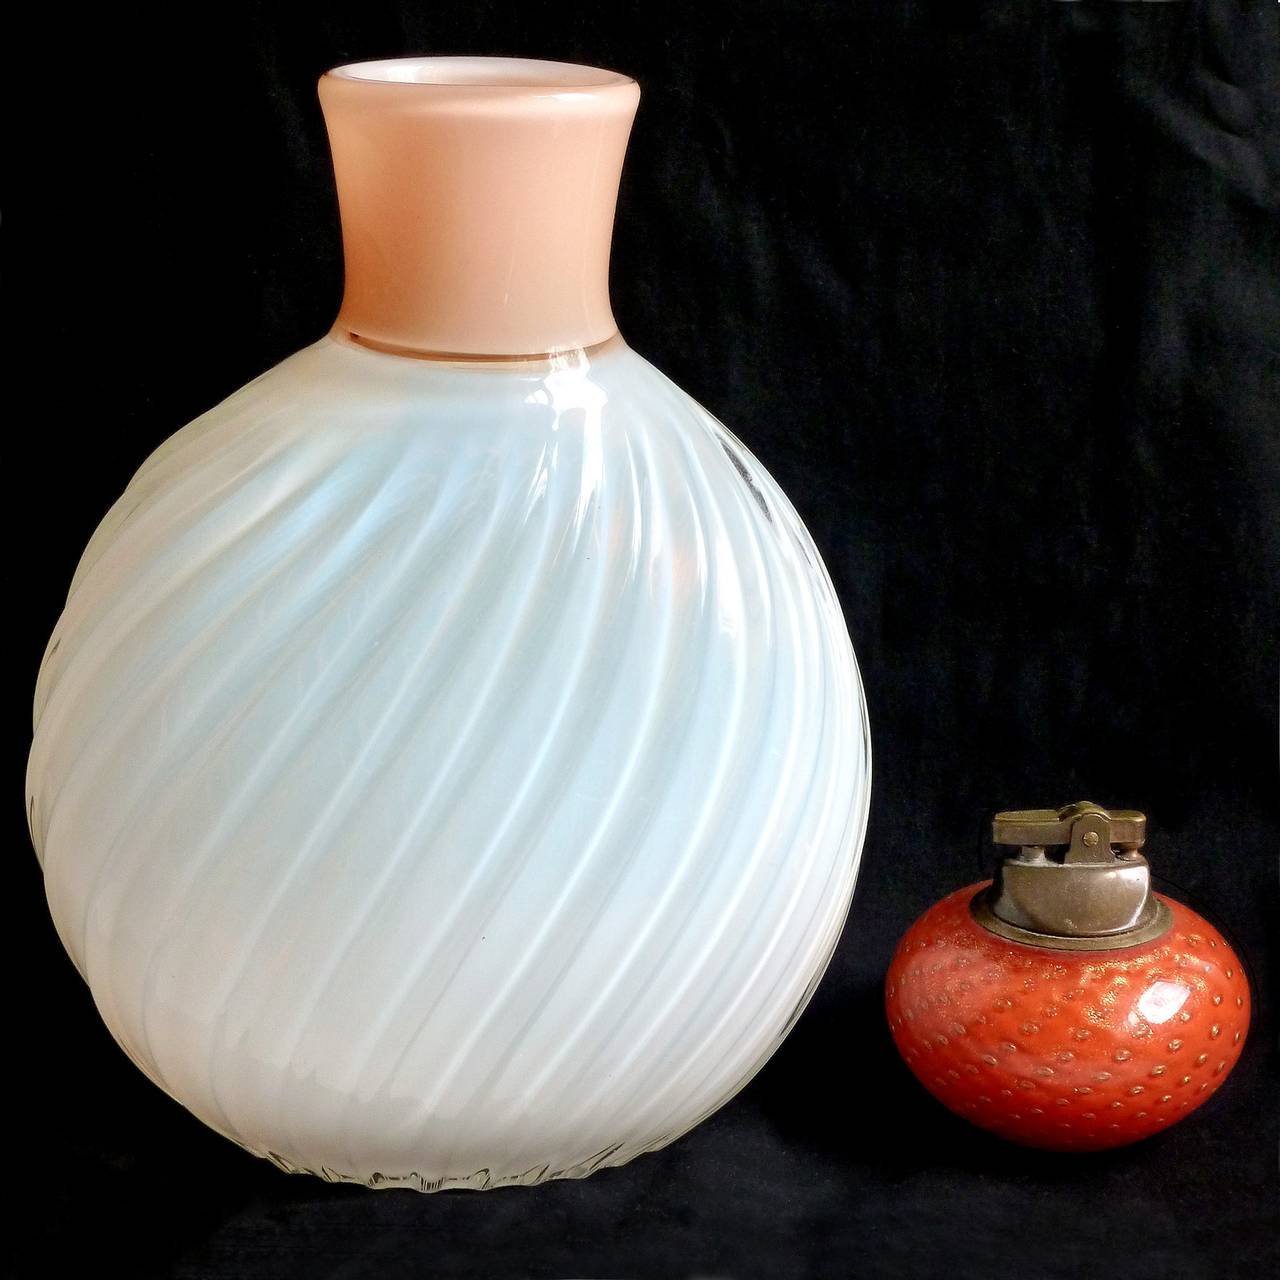 FREE Shipping Worldwide! See details below description.

Gorgeous Murano Hand Blown Opalescent White, with Peach Pink Rim Art Glass Flower Vase. Documented to designer Archimede Seguso, circa 1955, in the 